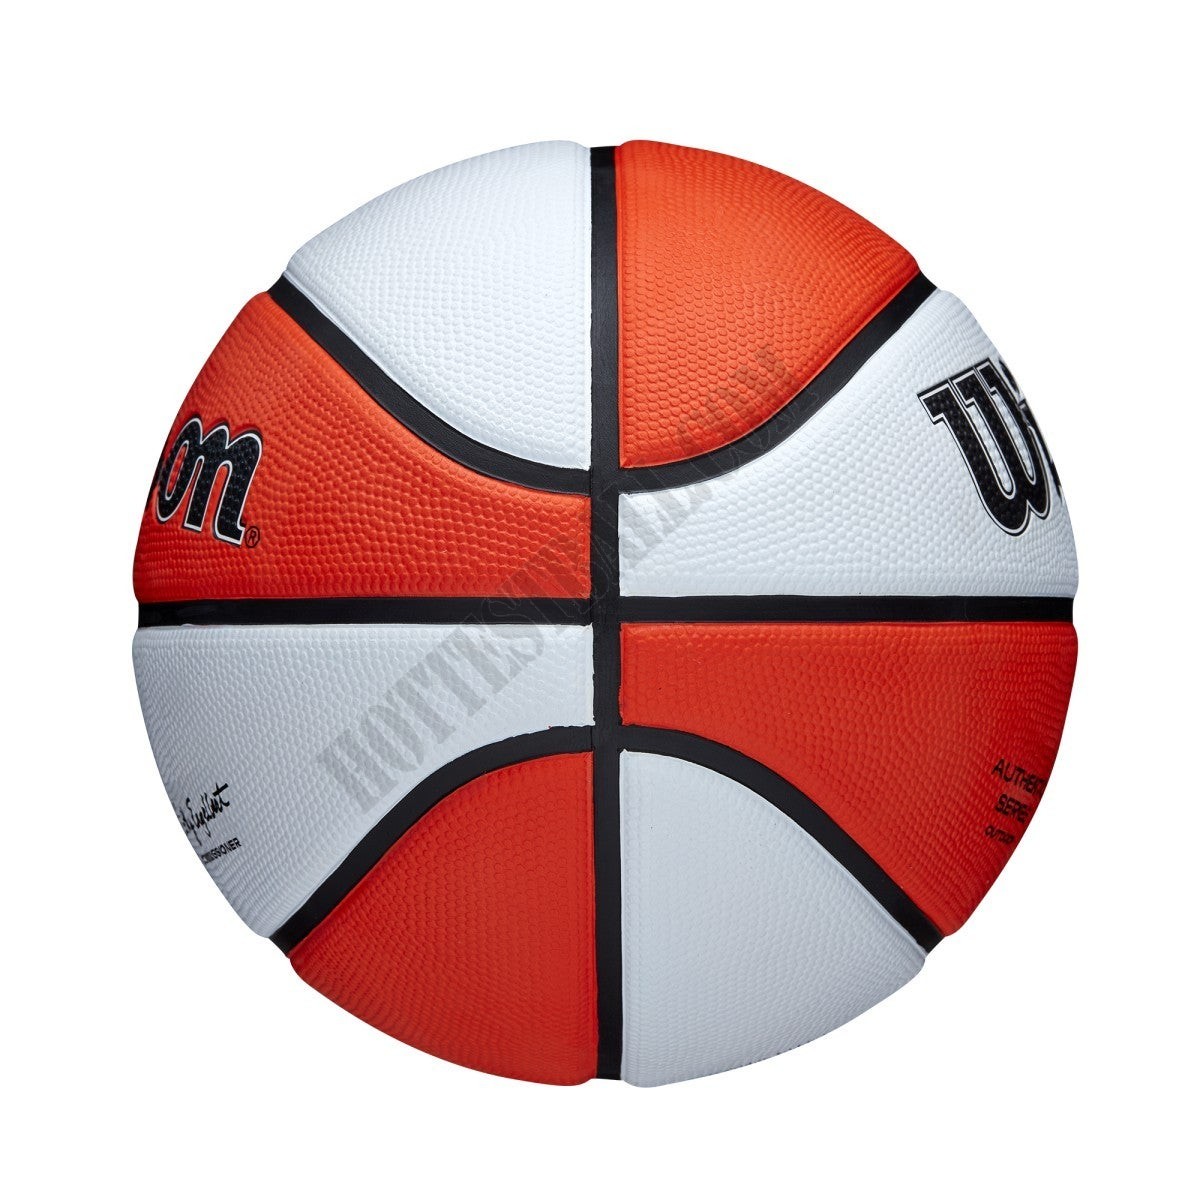 WNBA Authentic Outdoor Basketball - Wilson Discount Store - -4